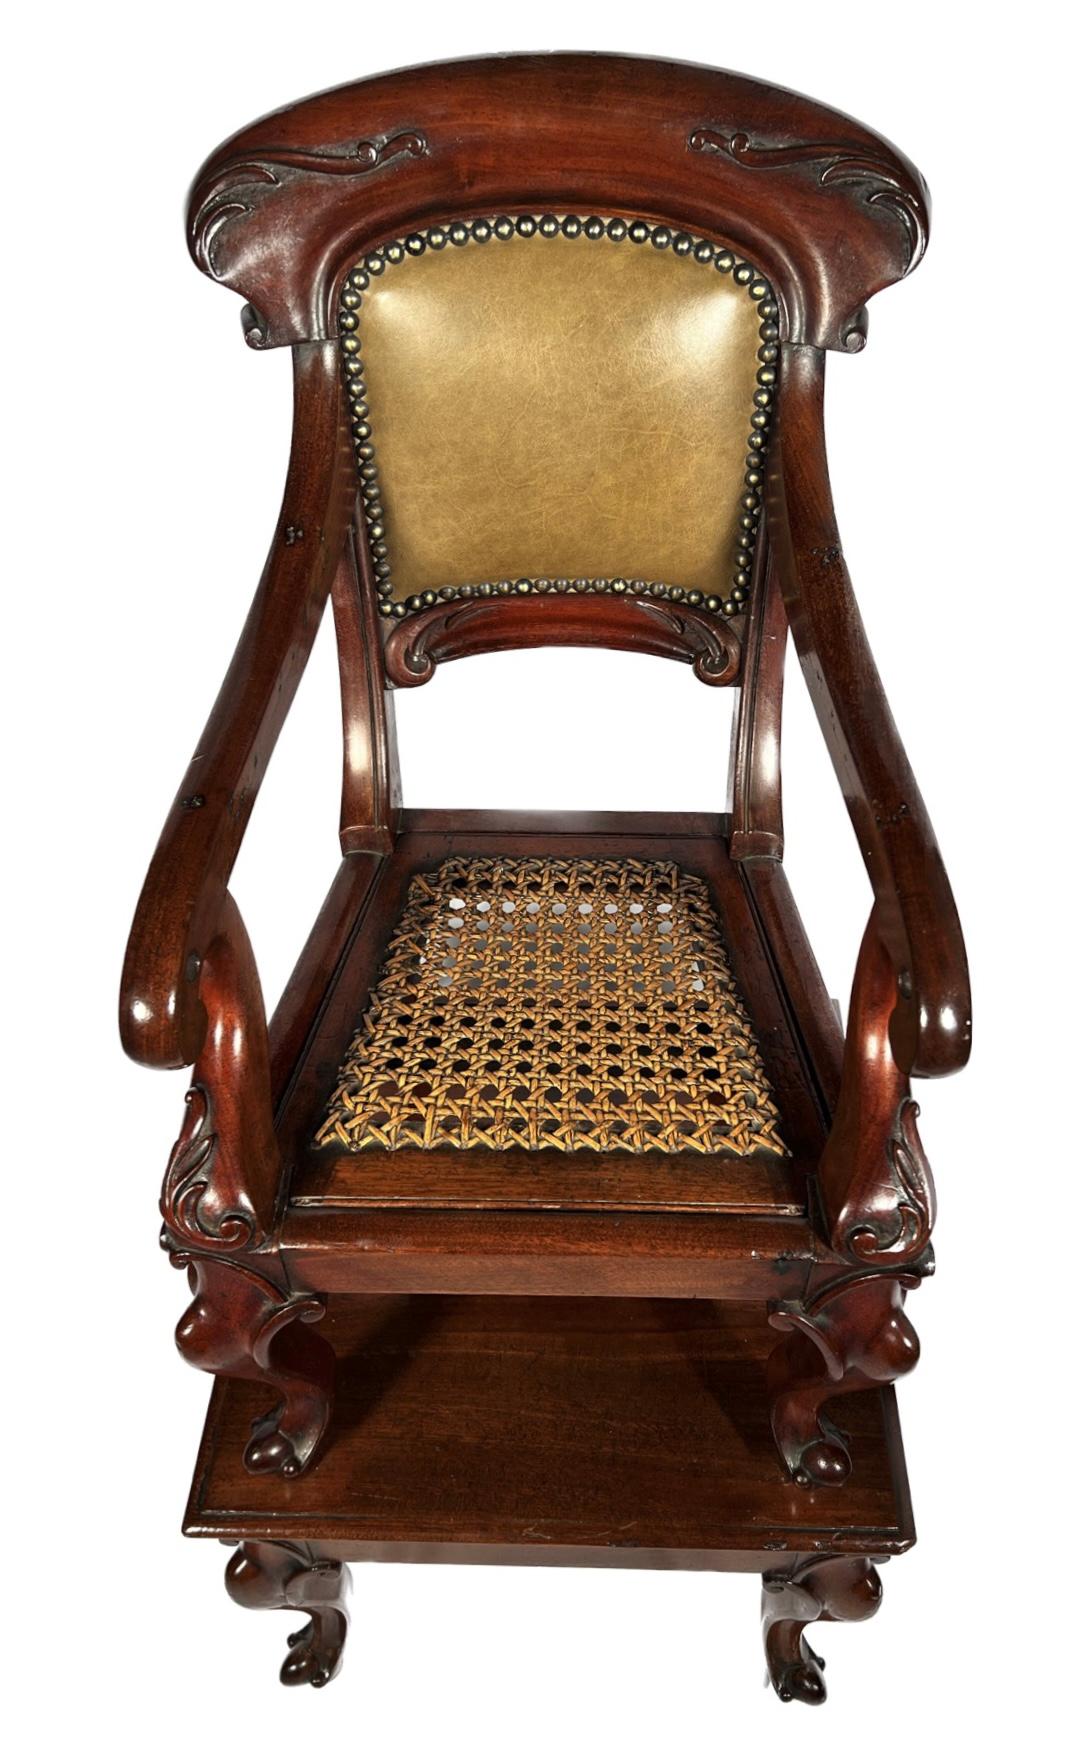 Antique English Victorian Child's Chair circa 1860 In Good Condition For Sale In New Orleans, LA